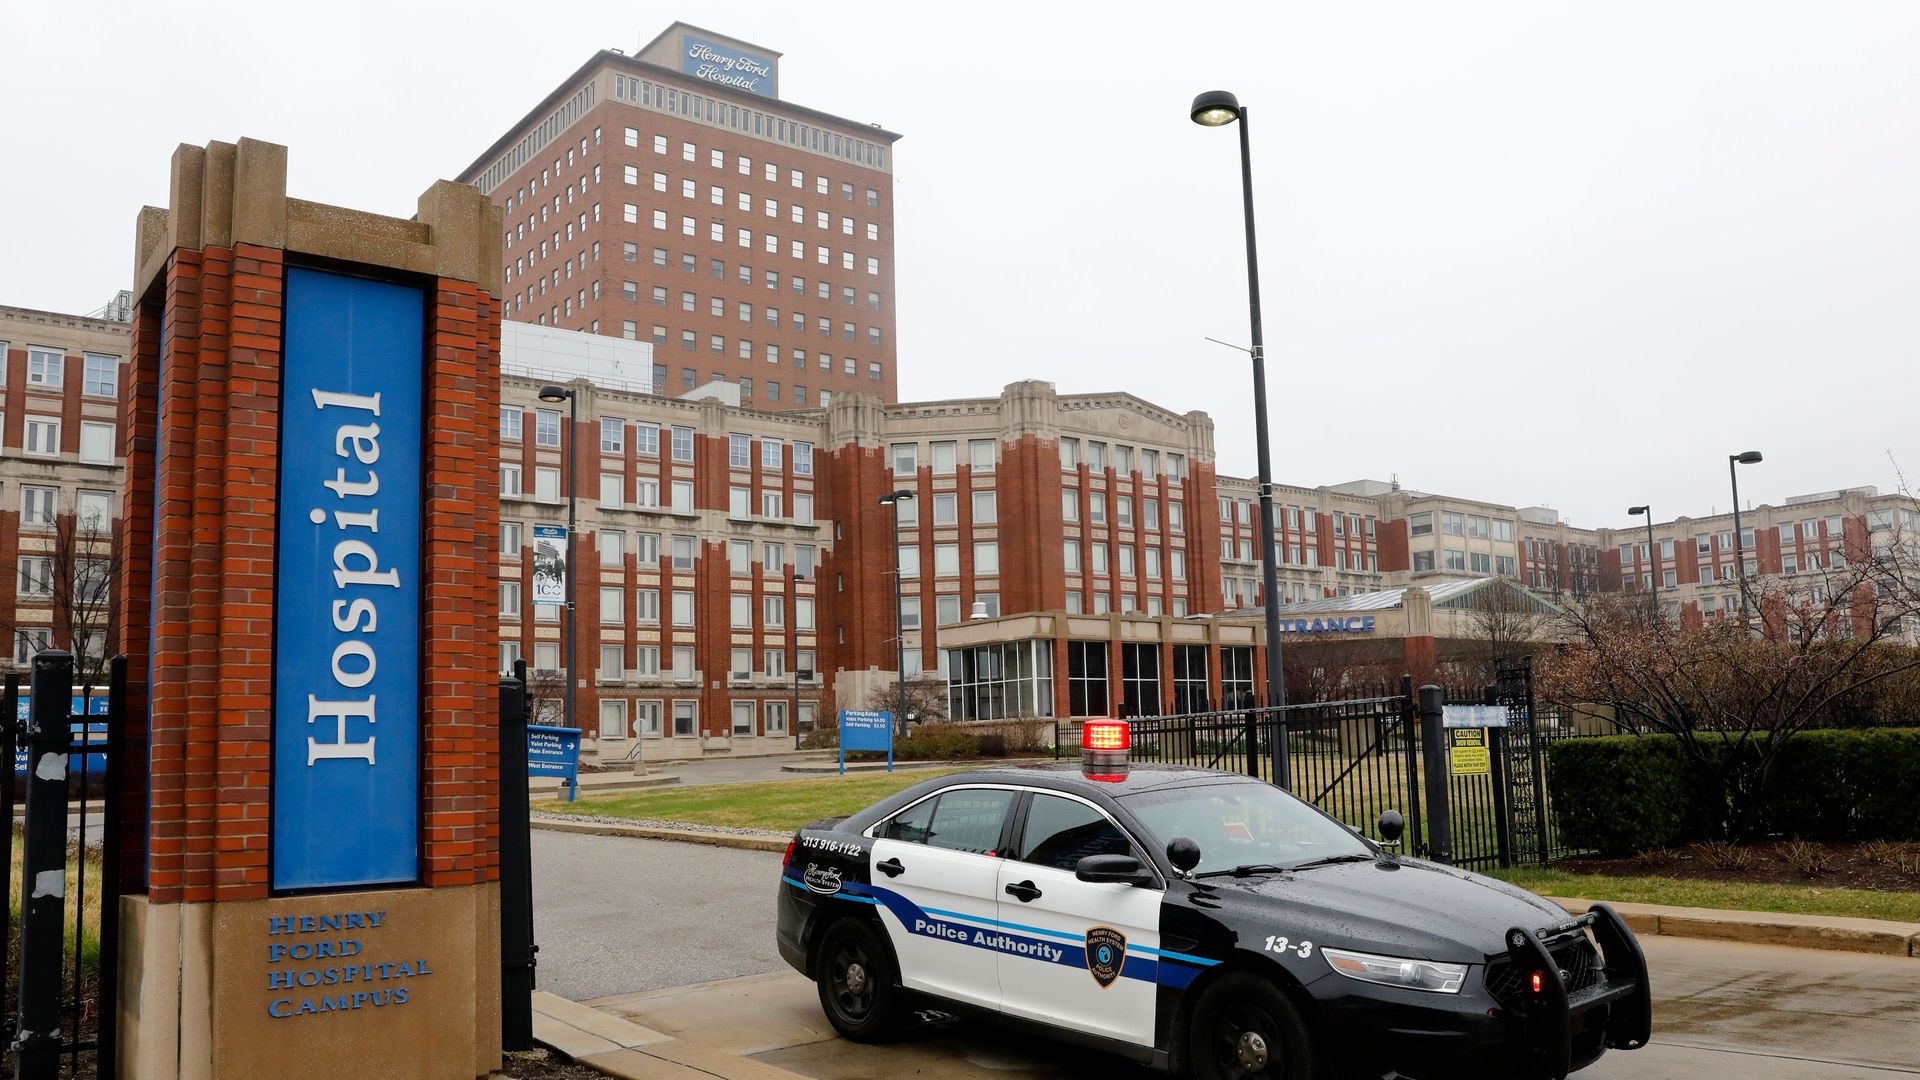  A police car leaves Henry Ford Hospital in Detroit, Michigan on April 7, 2020.